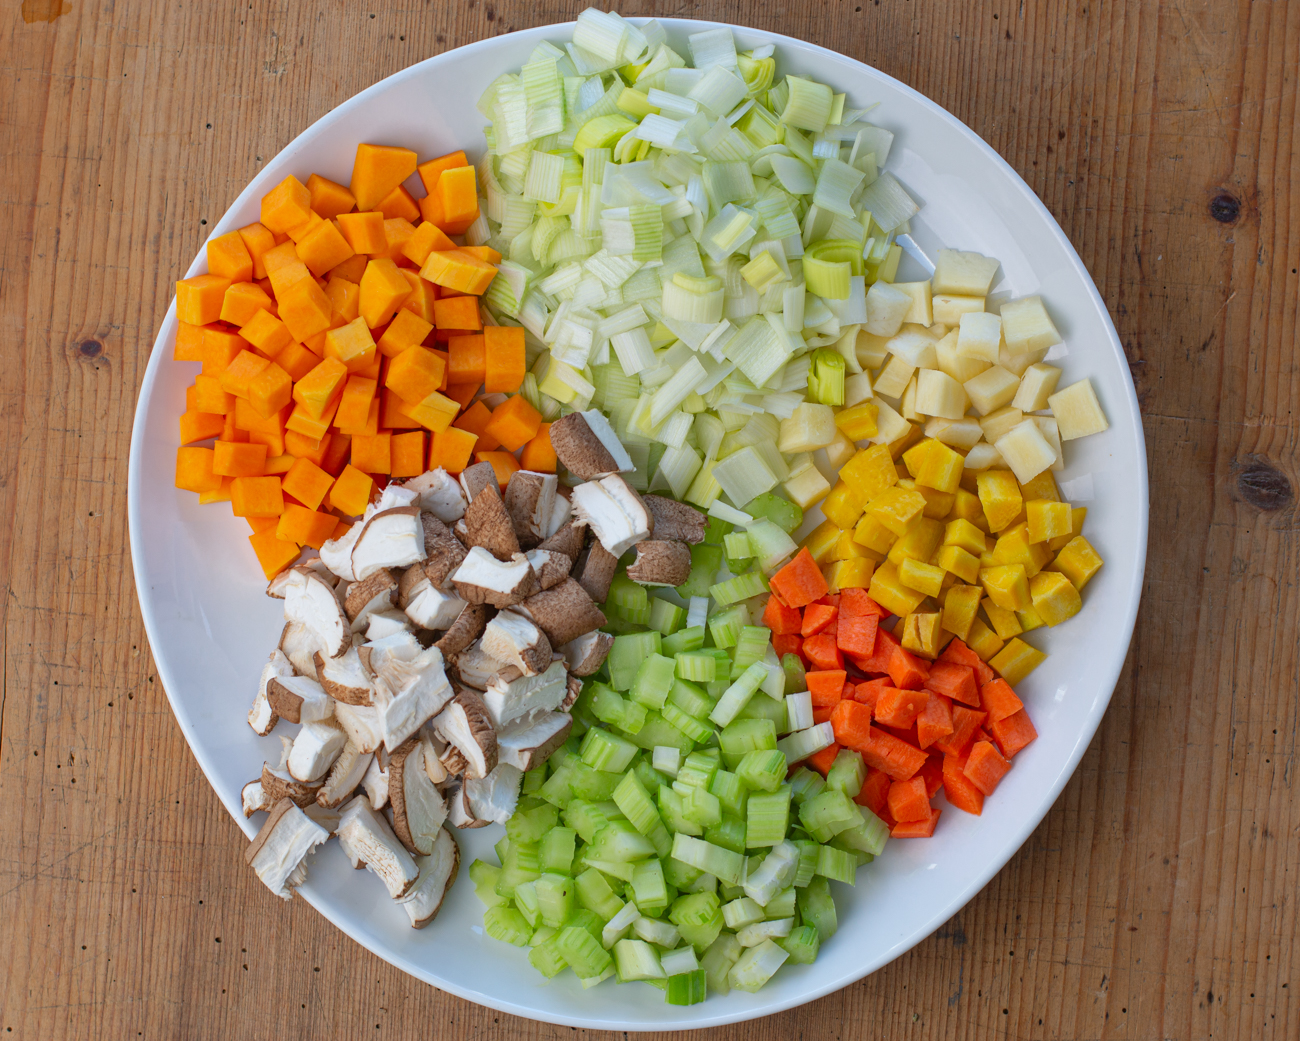 Diced Veggies for Vegetable Soup with Lentils & Buckwheat